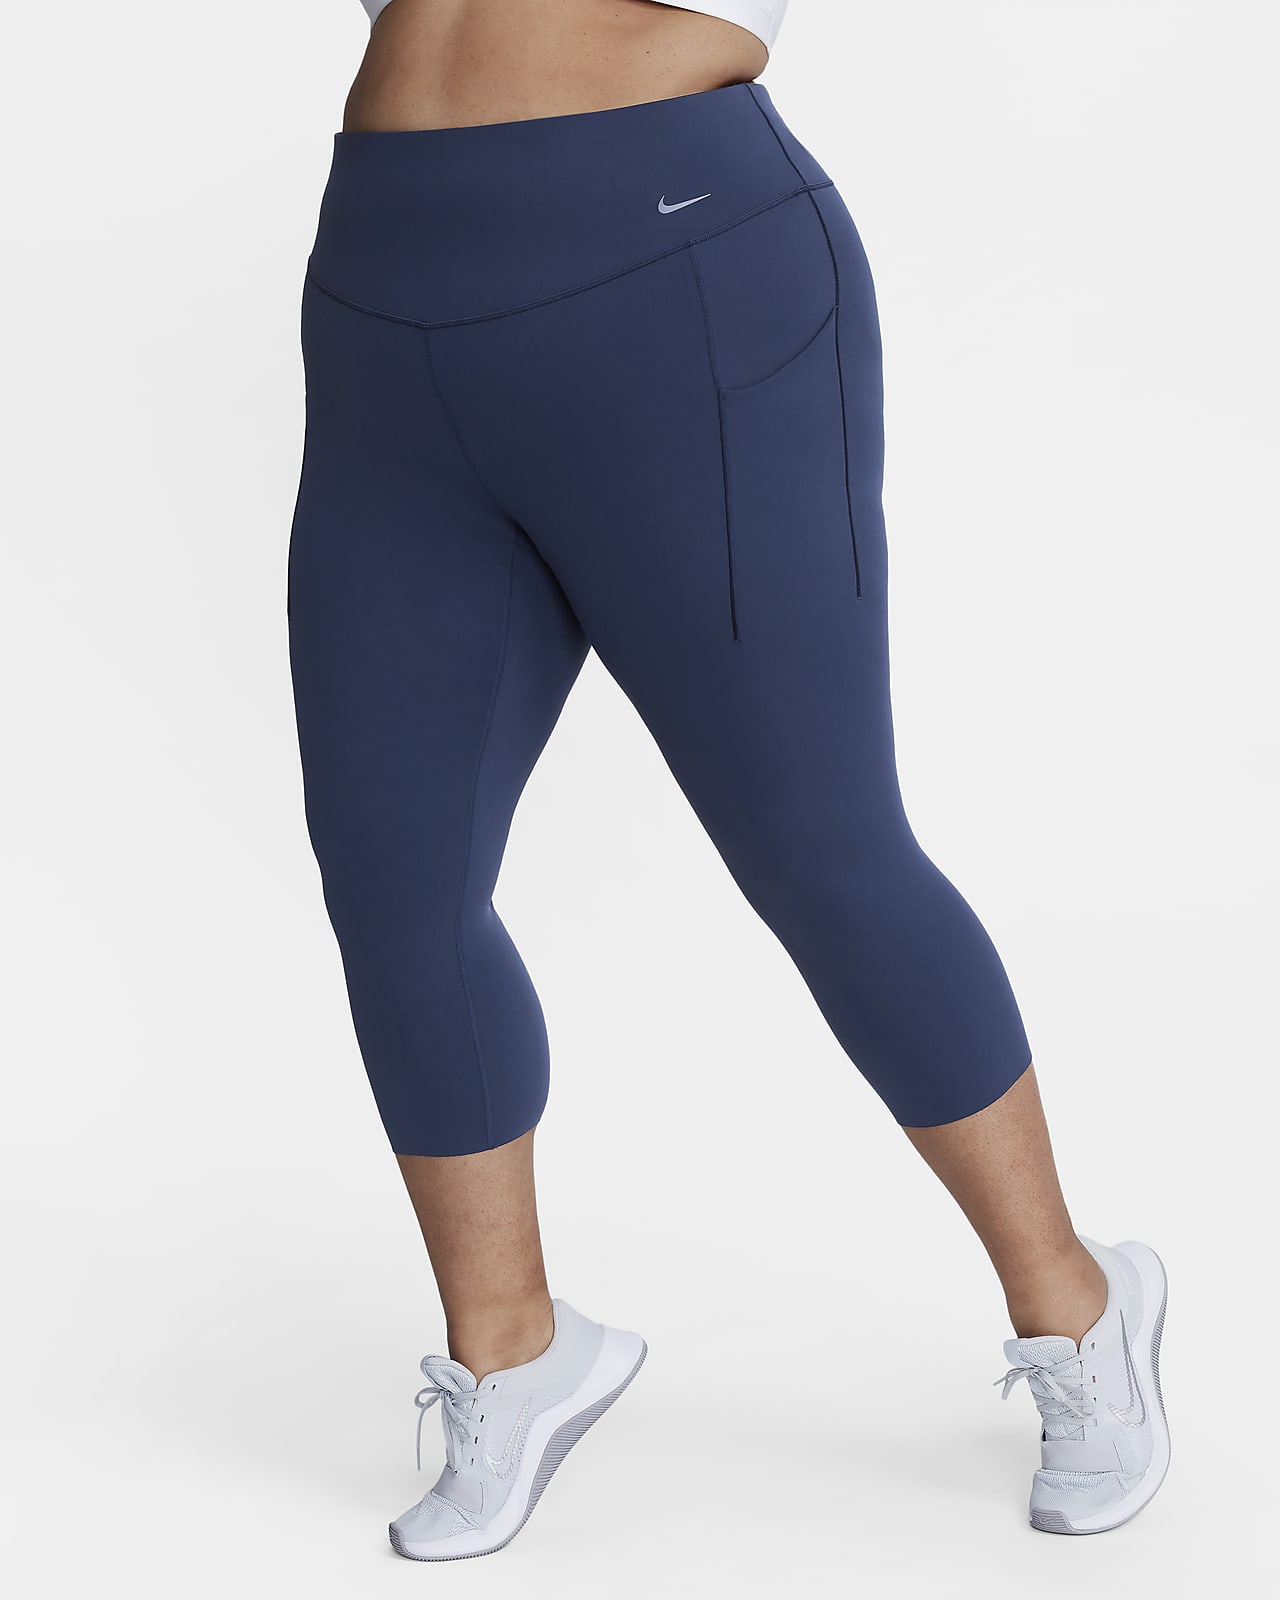 Tomboyx Workout Leggings, 7/8 Length High Waisted Active Yoga Pants With Pockets  For Women, Plus Size Inclusive (xs-6x) Embrace The Curve X Large : Target